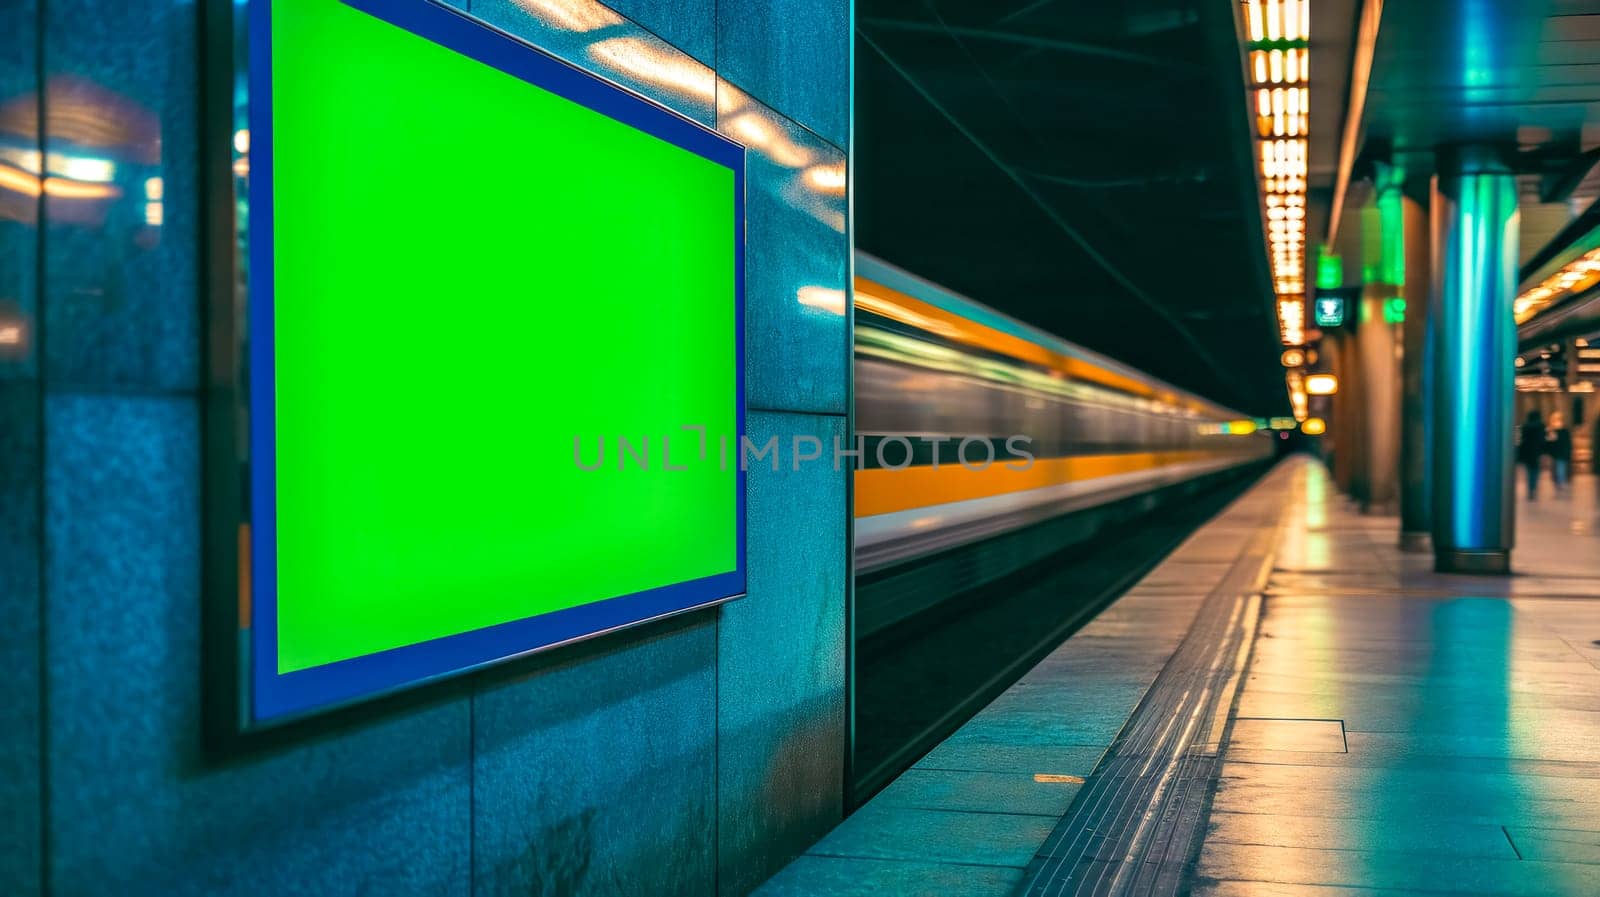 modern metro station with a motion-blurred train passing by, featuring a vivid green screen on a billboard, ready for advertising, against a backdrop of warm lights and cool-toned infrastructure by Edophoto